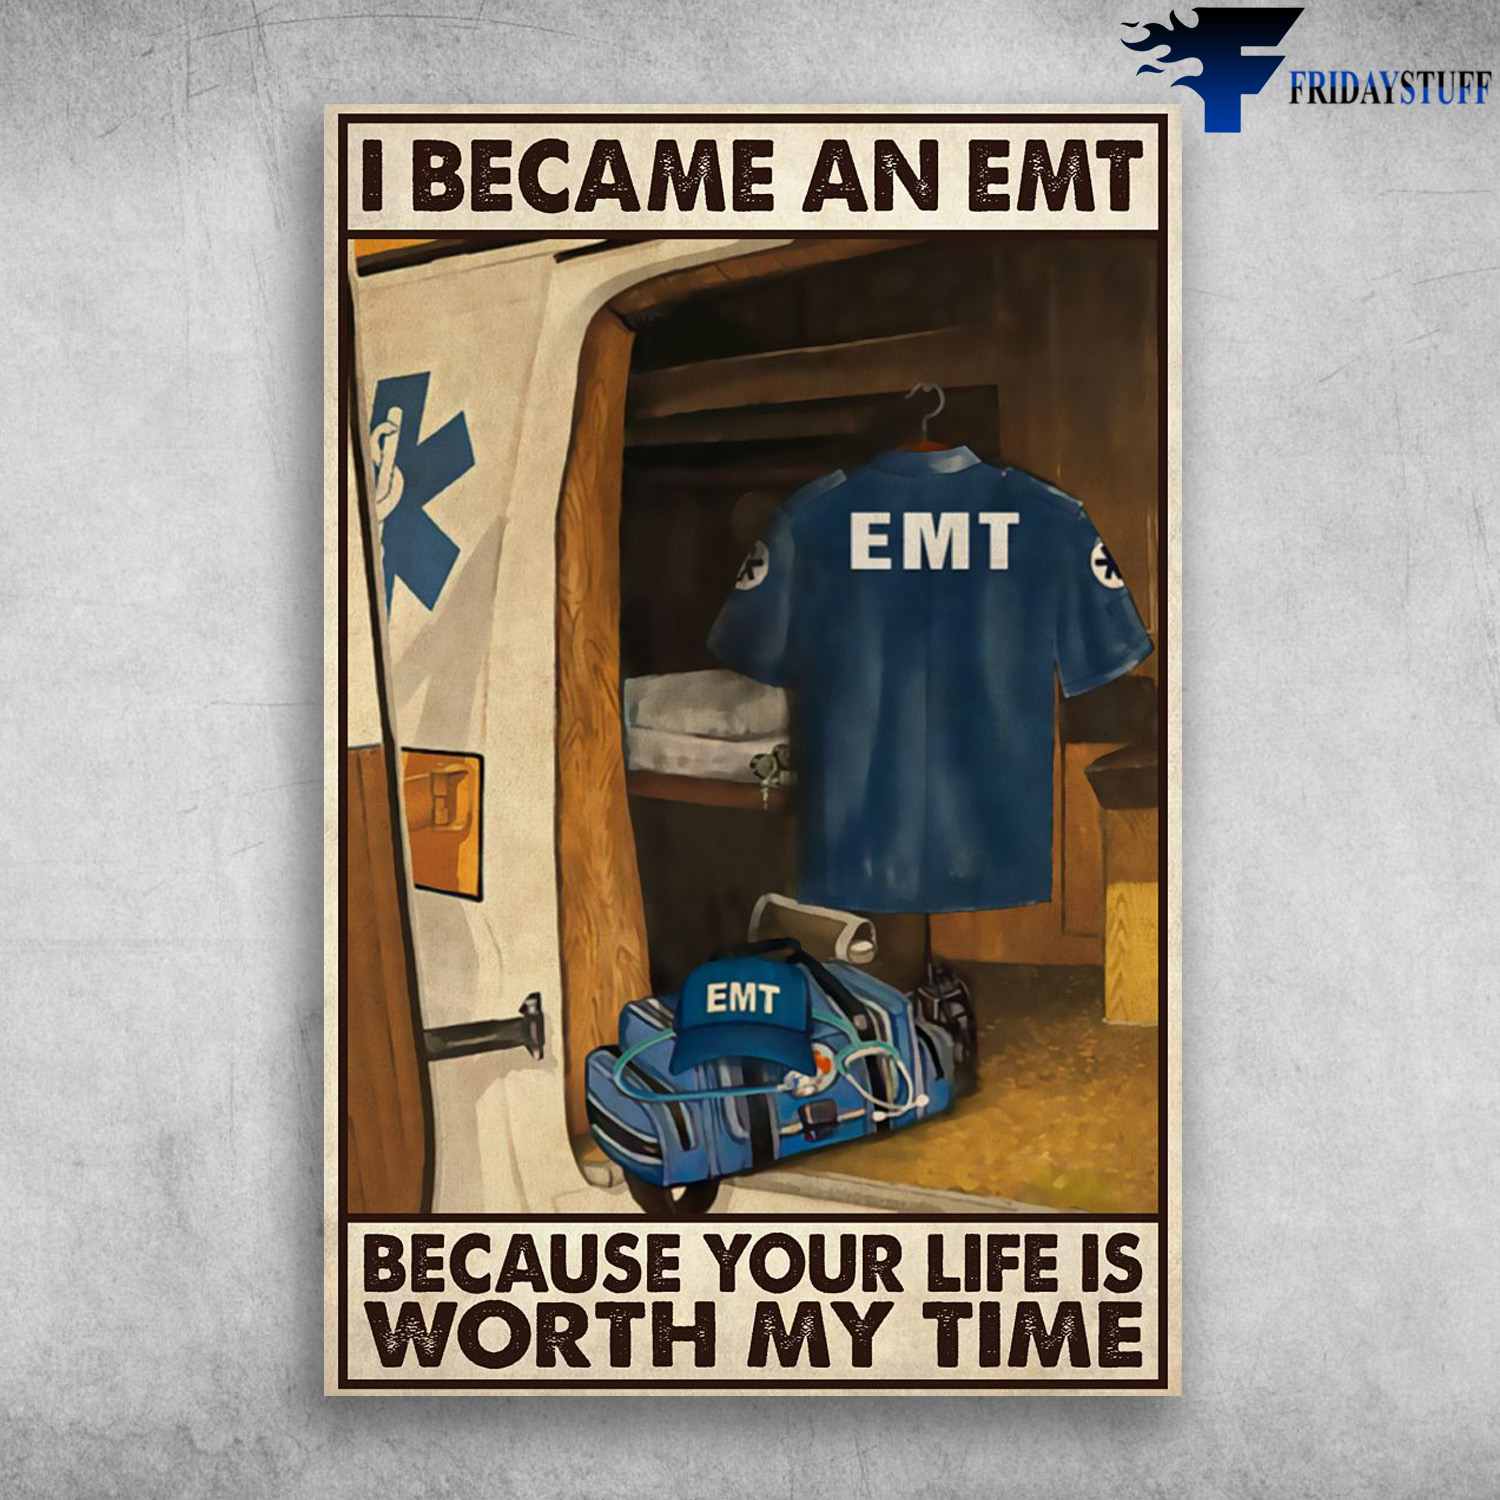 EMT - I Became An EMT, Because Your Life Is Worth My Time